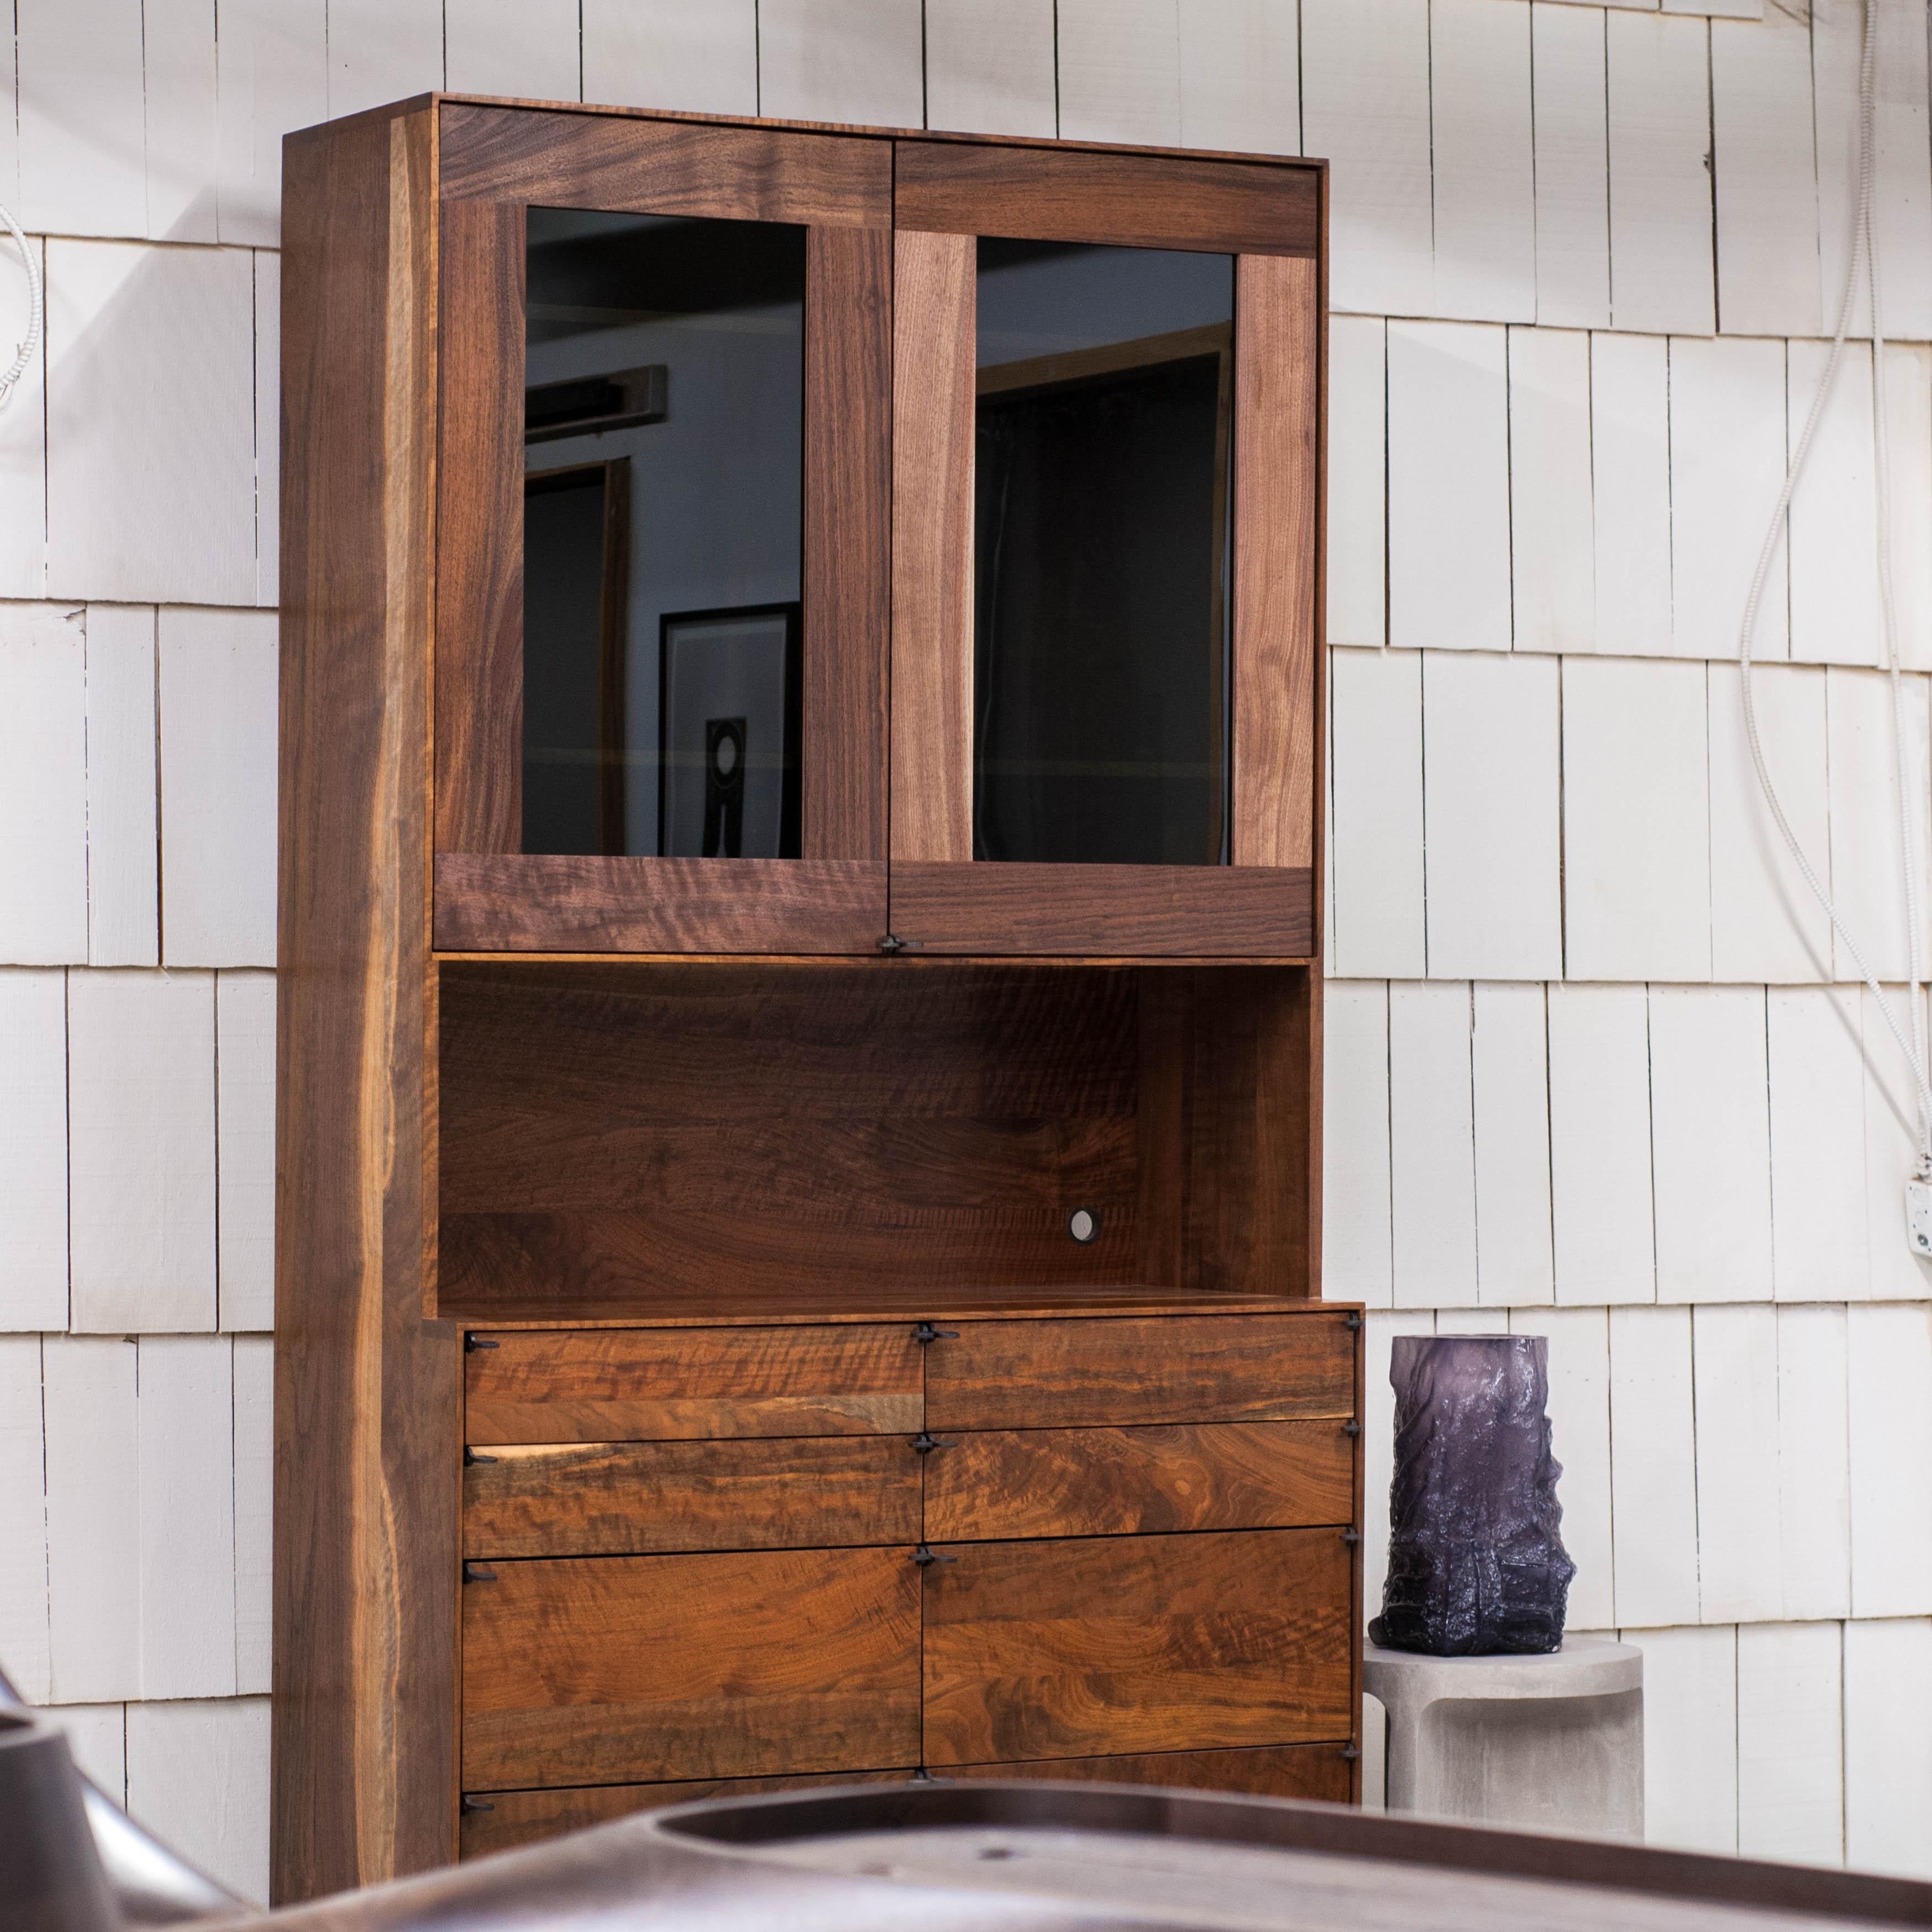 Curio cabinet constructed of Claro walnut, sourced from the Gibson Guitar factory. Blackened metal hardware. Chalice and camp style pulls. Minimal edge reveal with soft close hardware, dovetailed drawers, and height adjustable shelving. Options